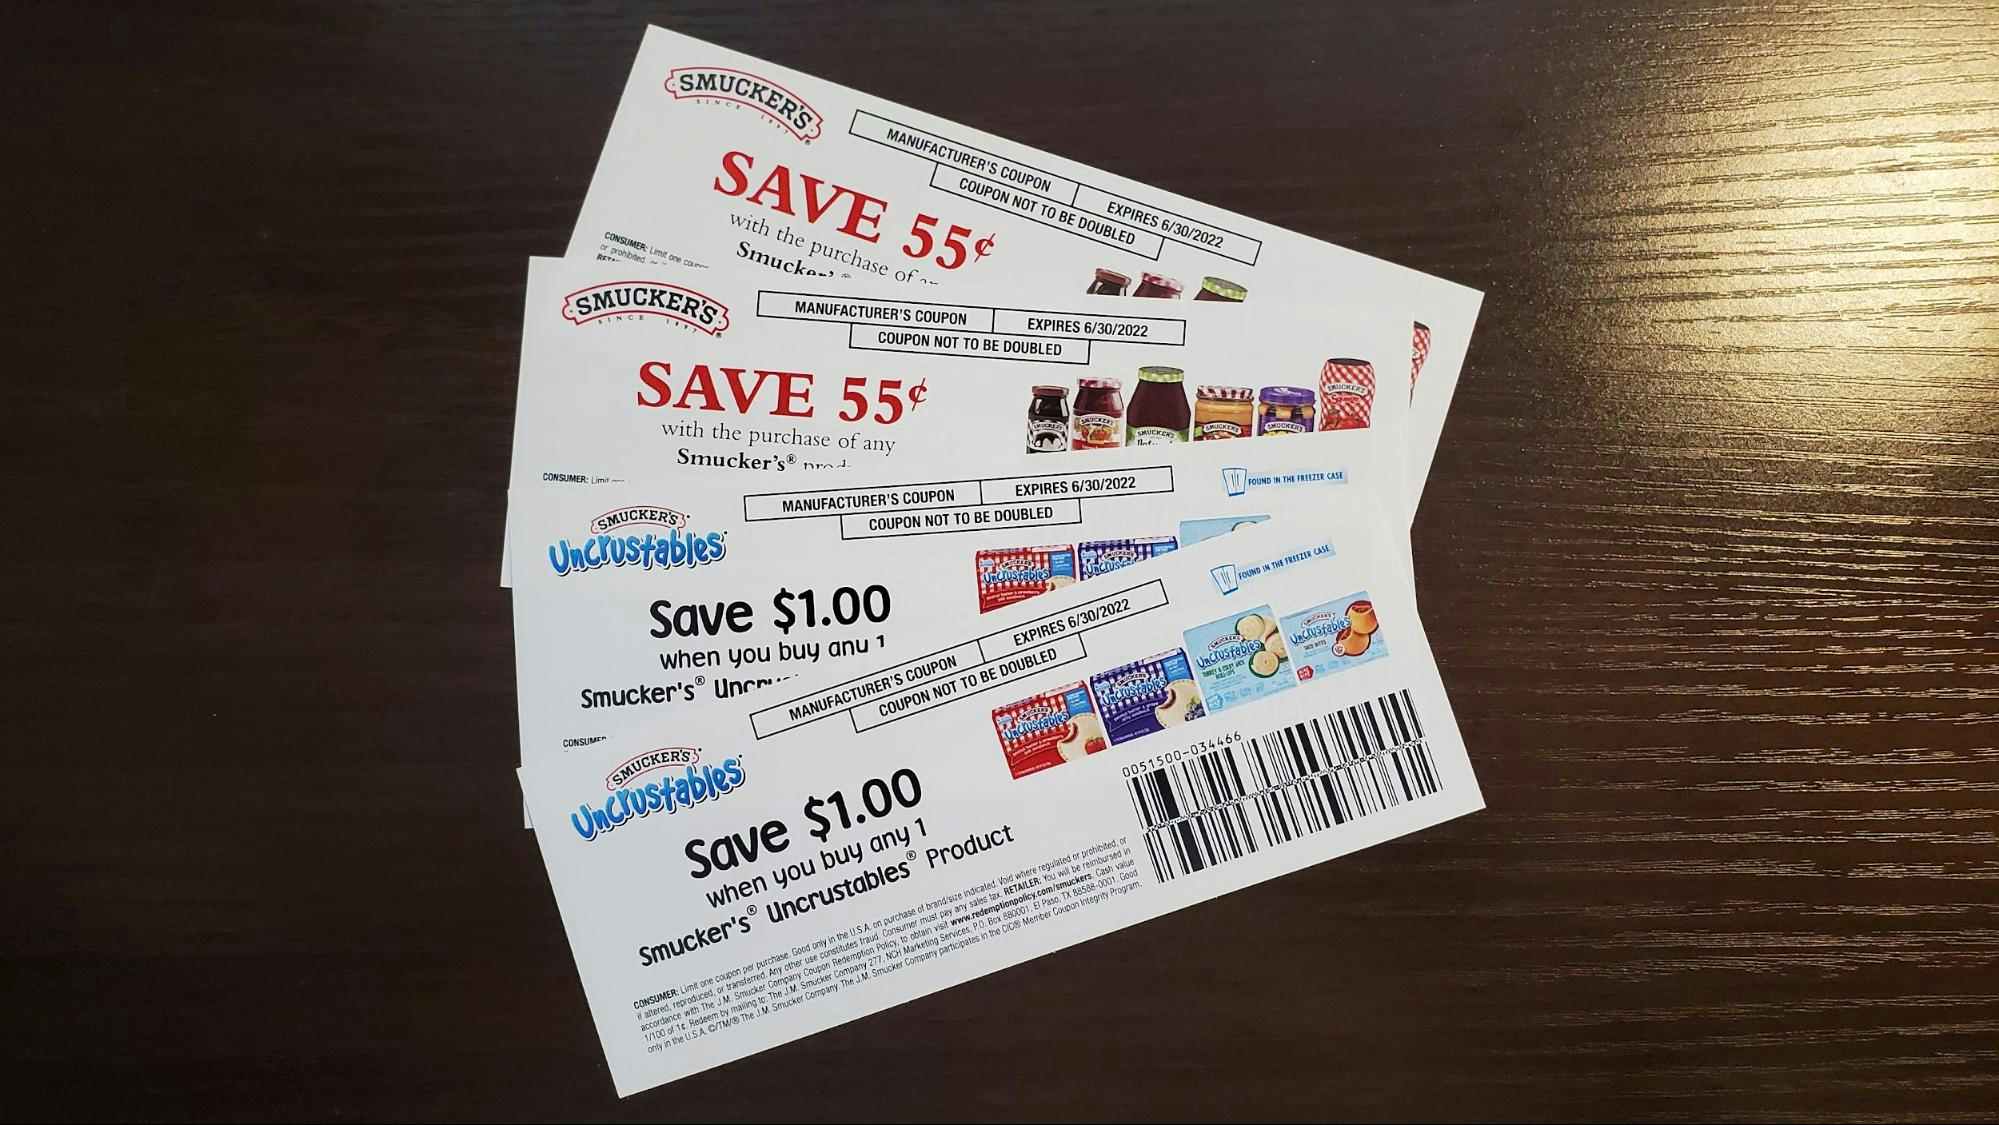 Free Smuckers coupons by mail